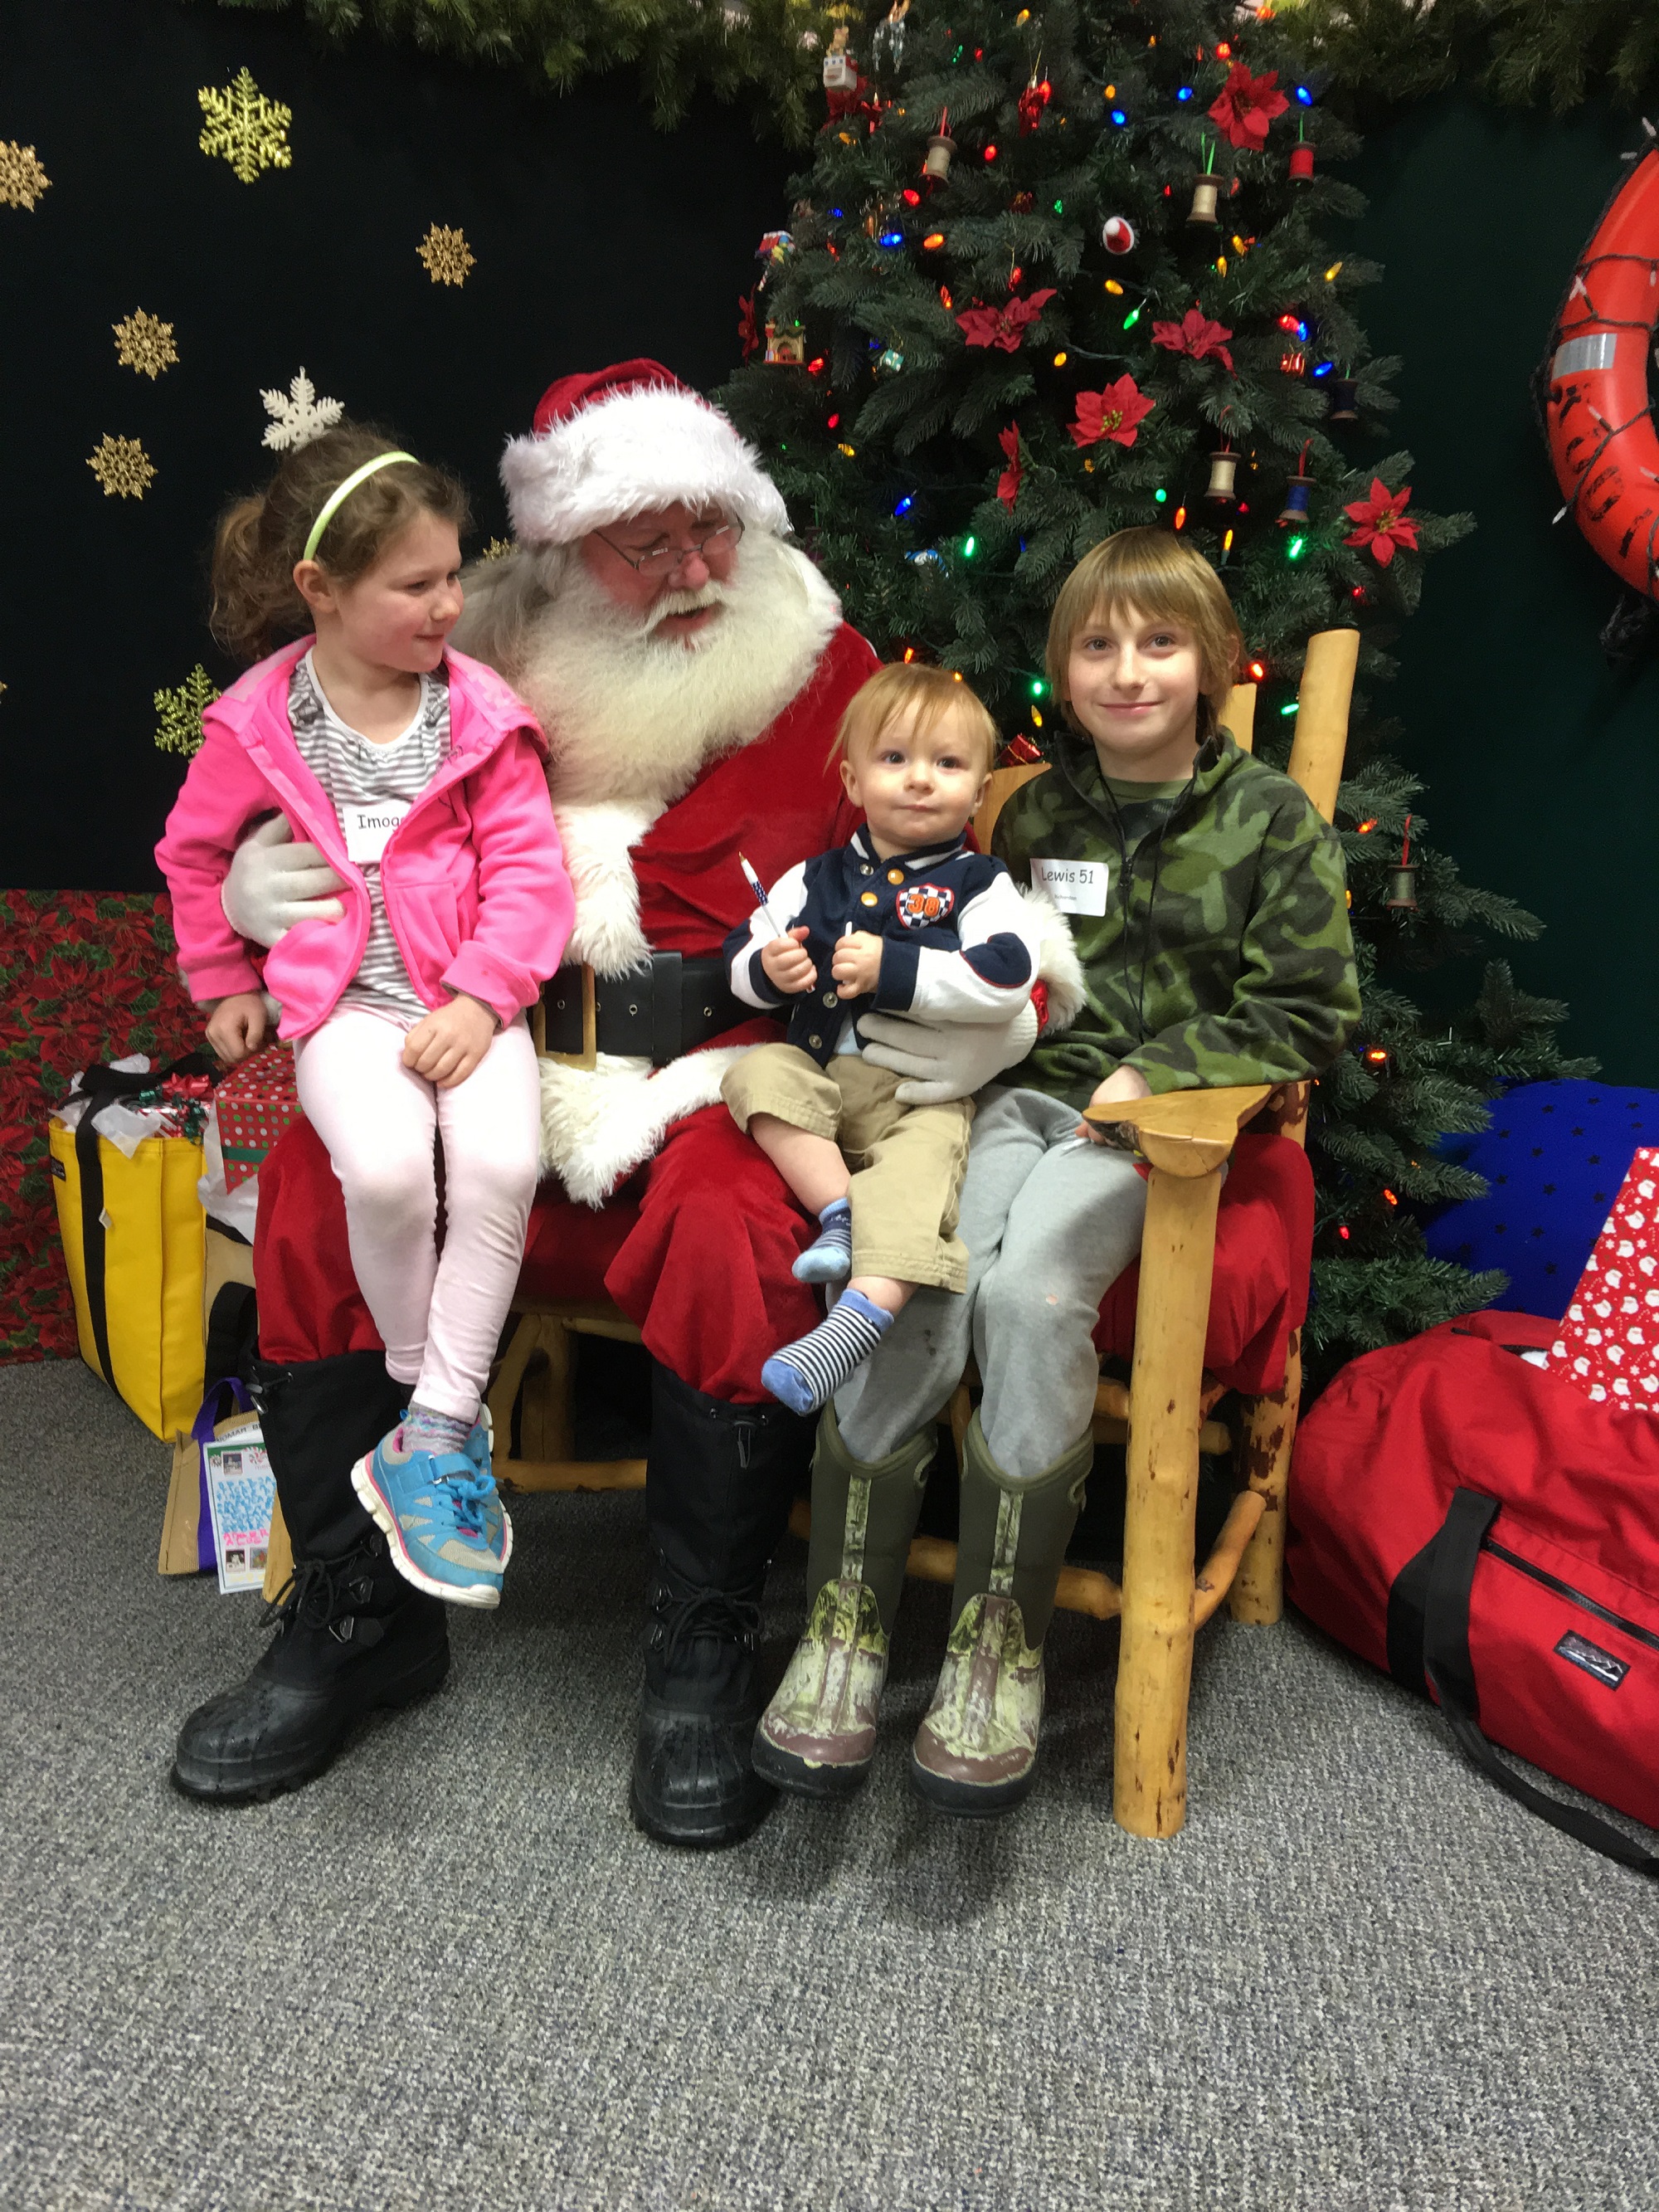 Imogen Richardson, age 7, and her brothers Erik, 1, and Lewis, 9, visit with Santa during Nomar's annual holiday open house on Sunday. Their parents are Steven and Jenna Richardson. The family is from County Mayo in Ireland and is living in Homer while Steven Richardson studies at Alaska Bible Institute.-Photo by Lori Evans, Homer News